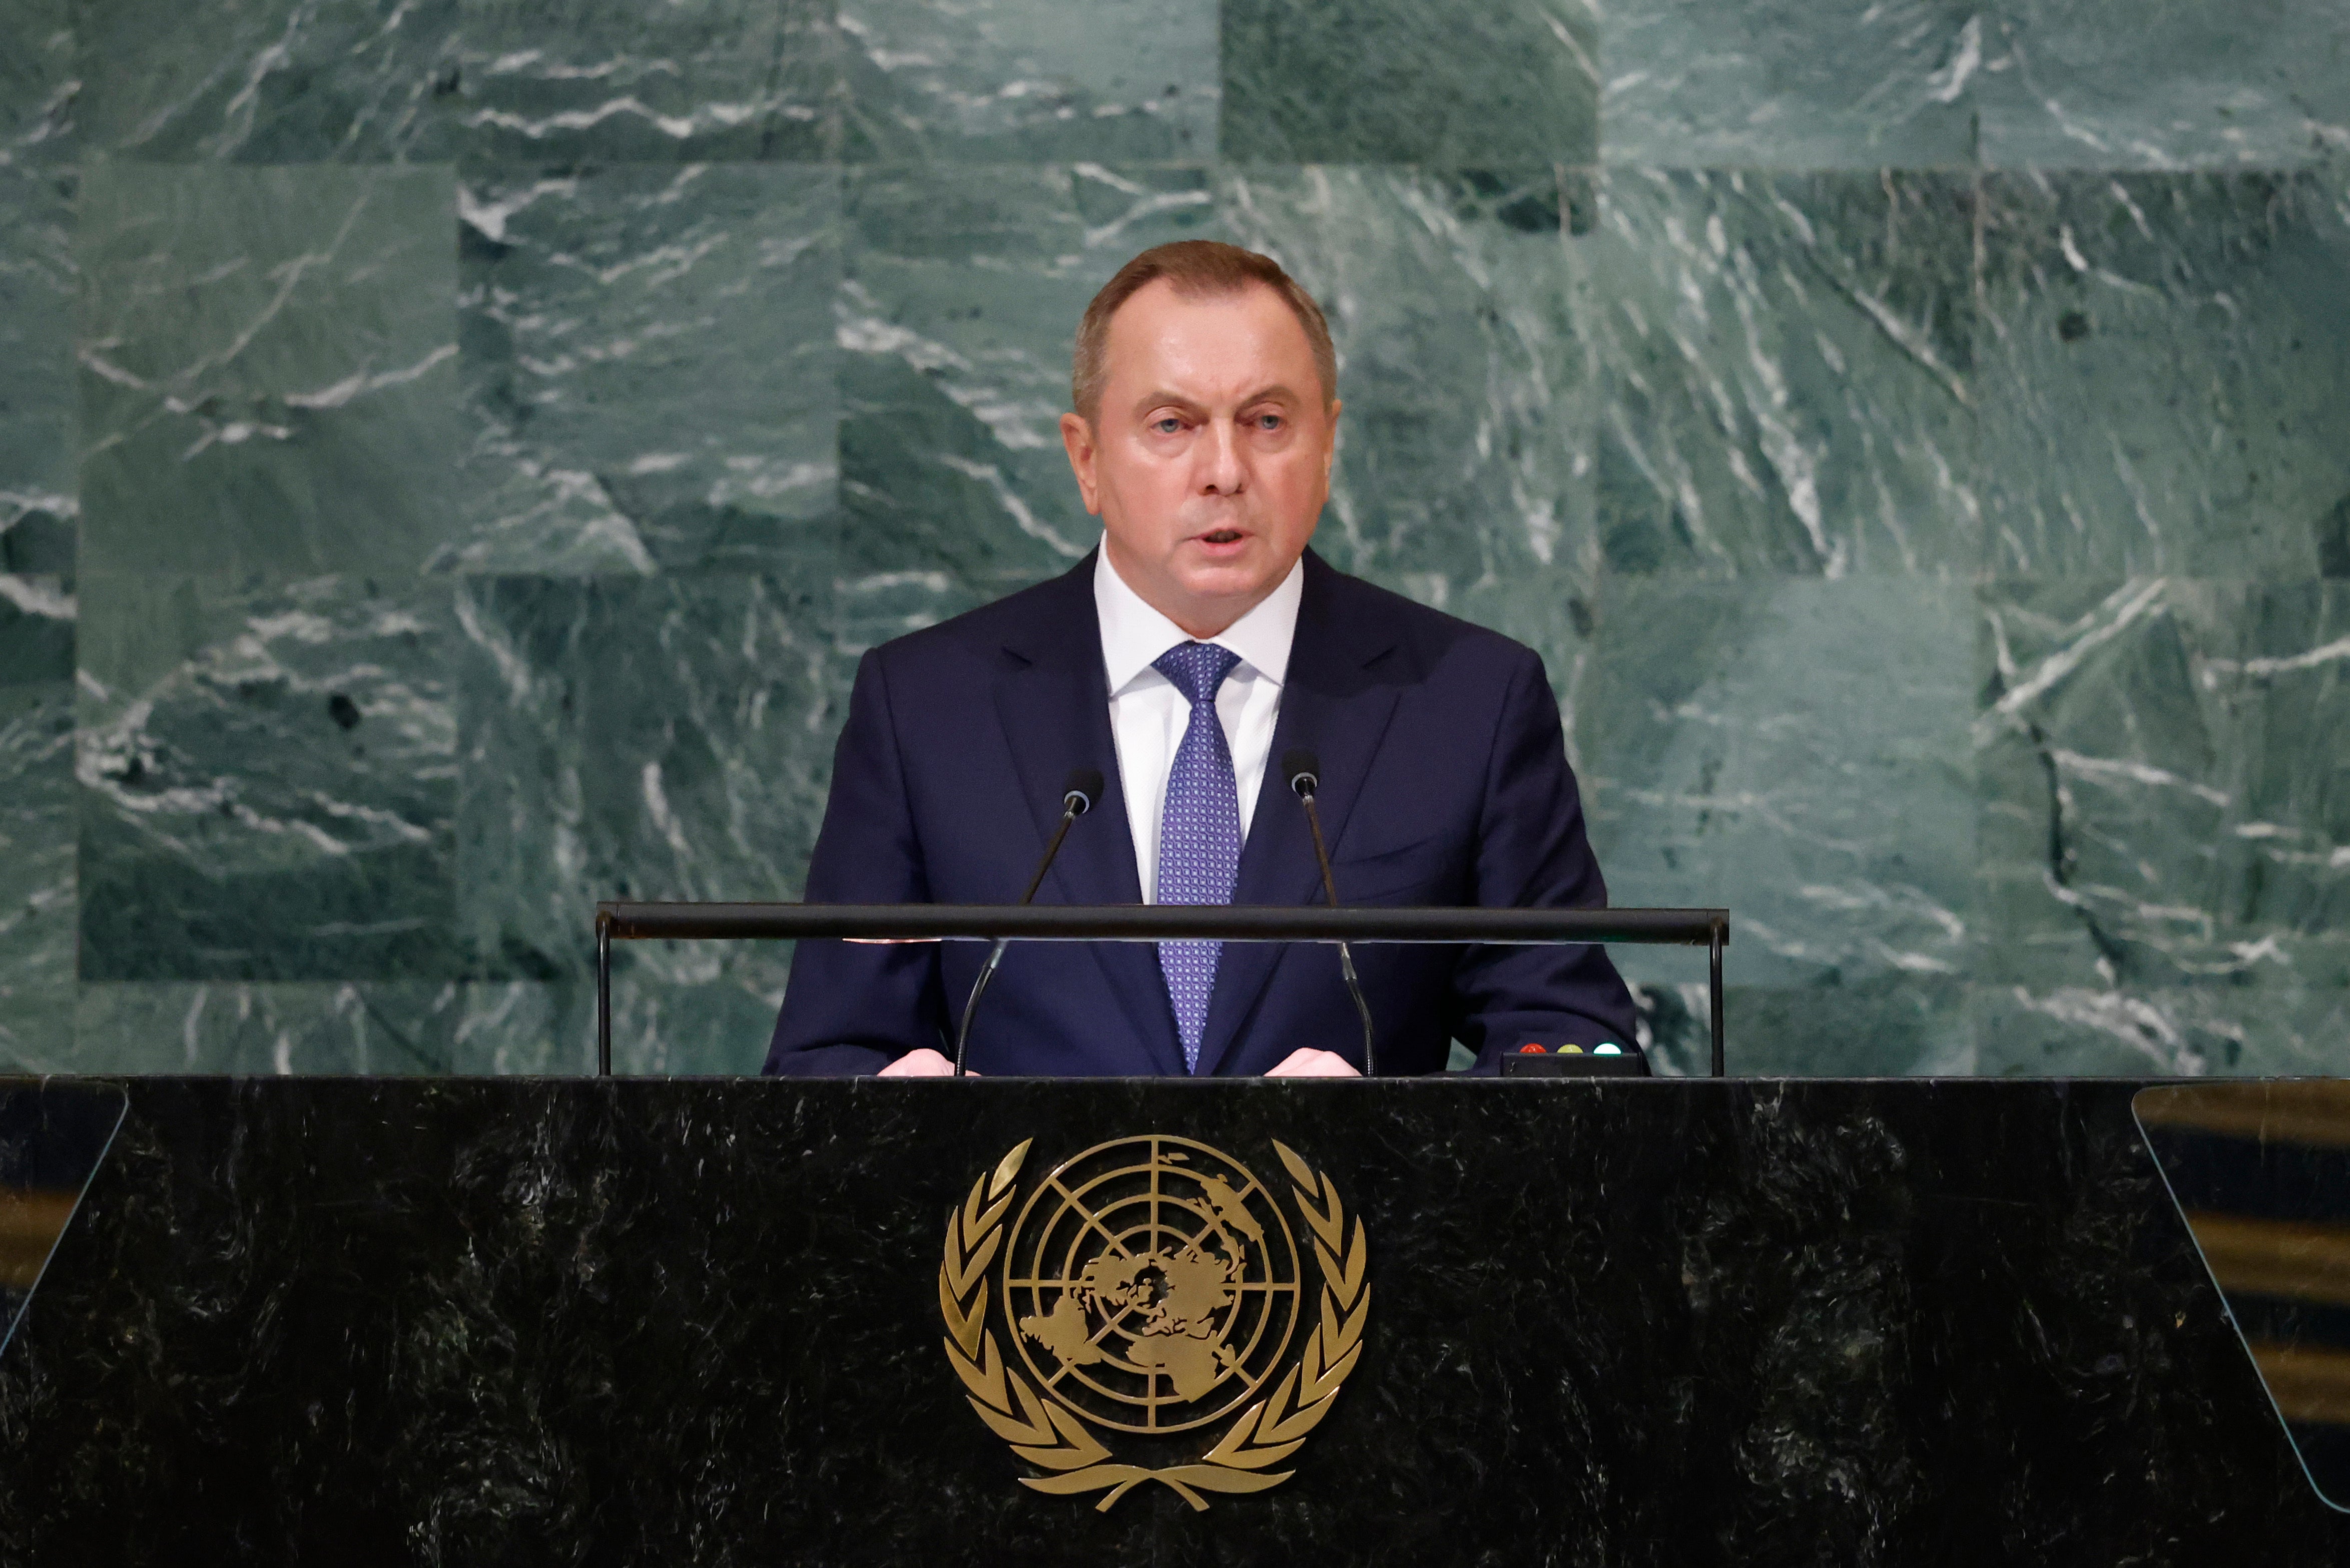 Vladimir Makei addressing the UN in September 2022, one month before his reported death